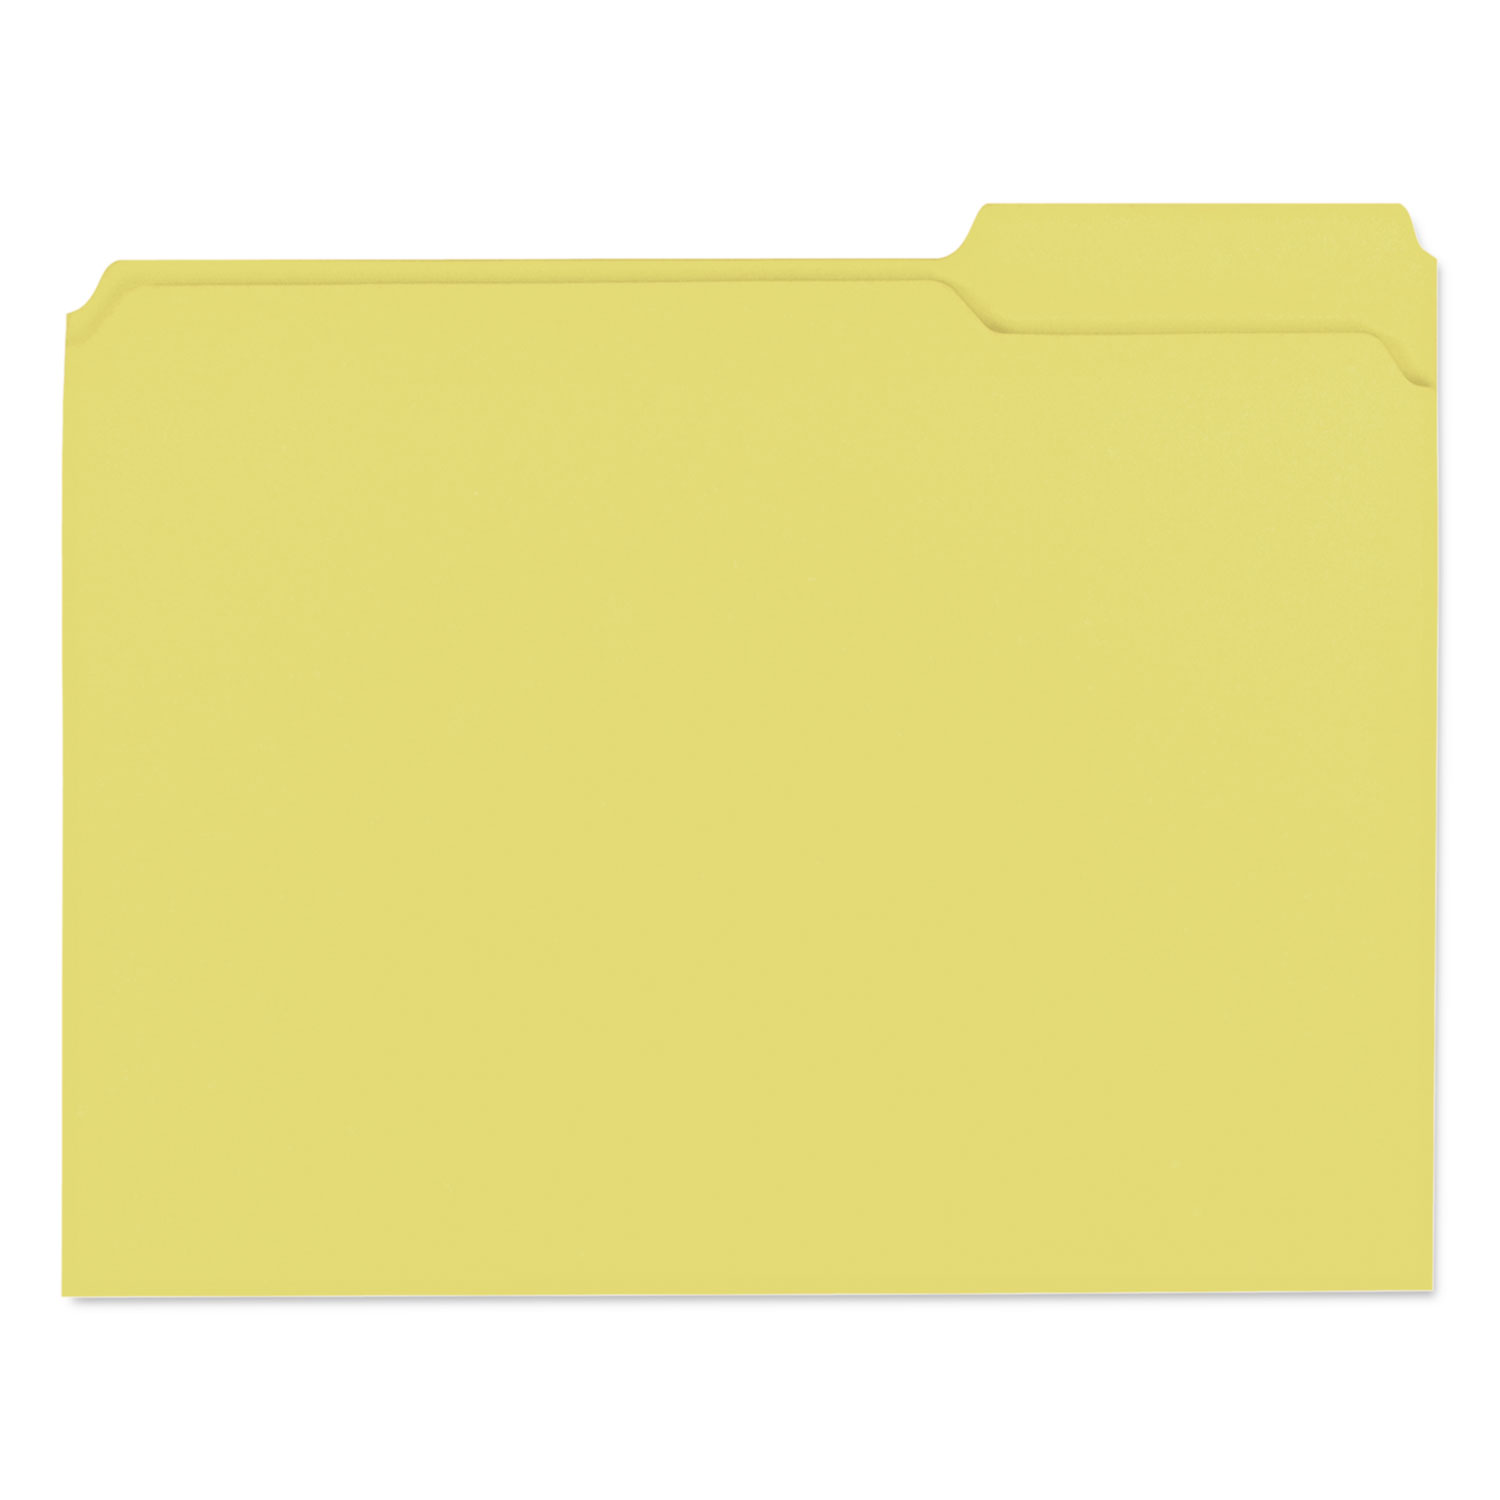  Universal UNV16164 Reinforced Top-Tab File Folders, 1/3-Cut Tabs, Letter Size, Yellow, 100/Box (UNV16164) 